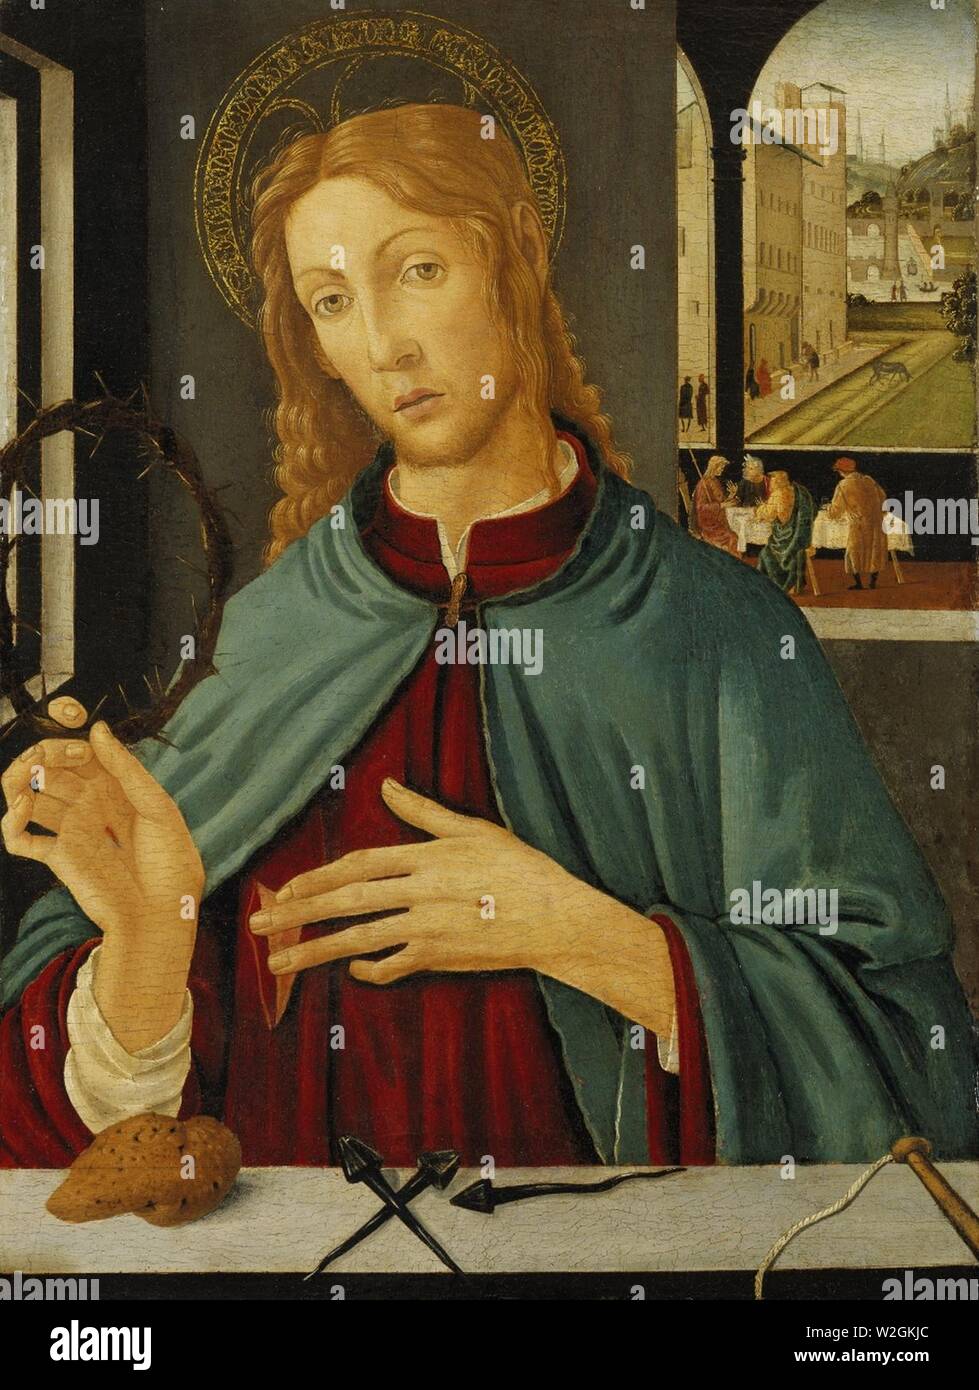 Christ with Instruments of the Passion - Jacopo d'Arcangelo del Sellaio. Stock Photo